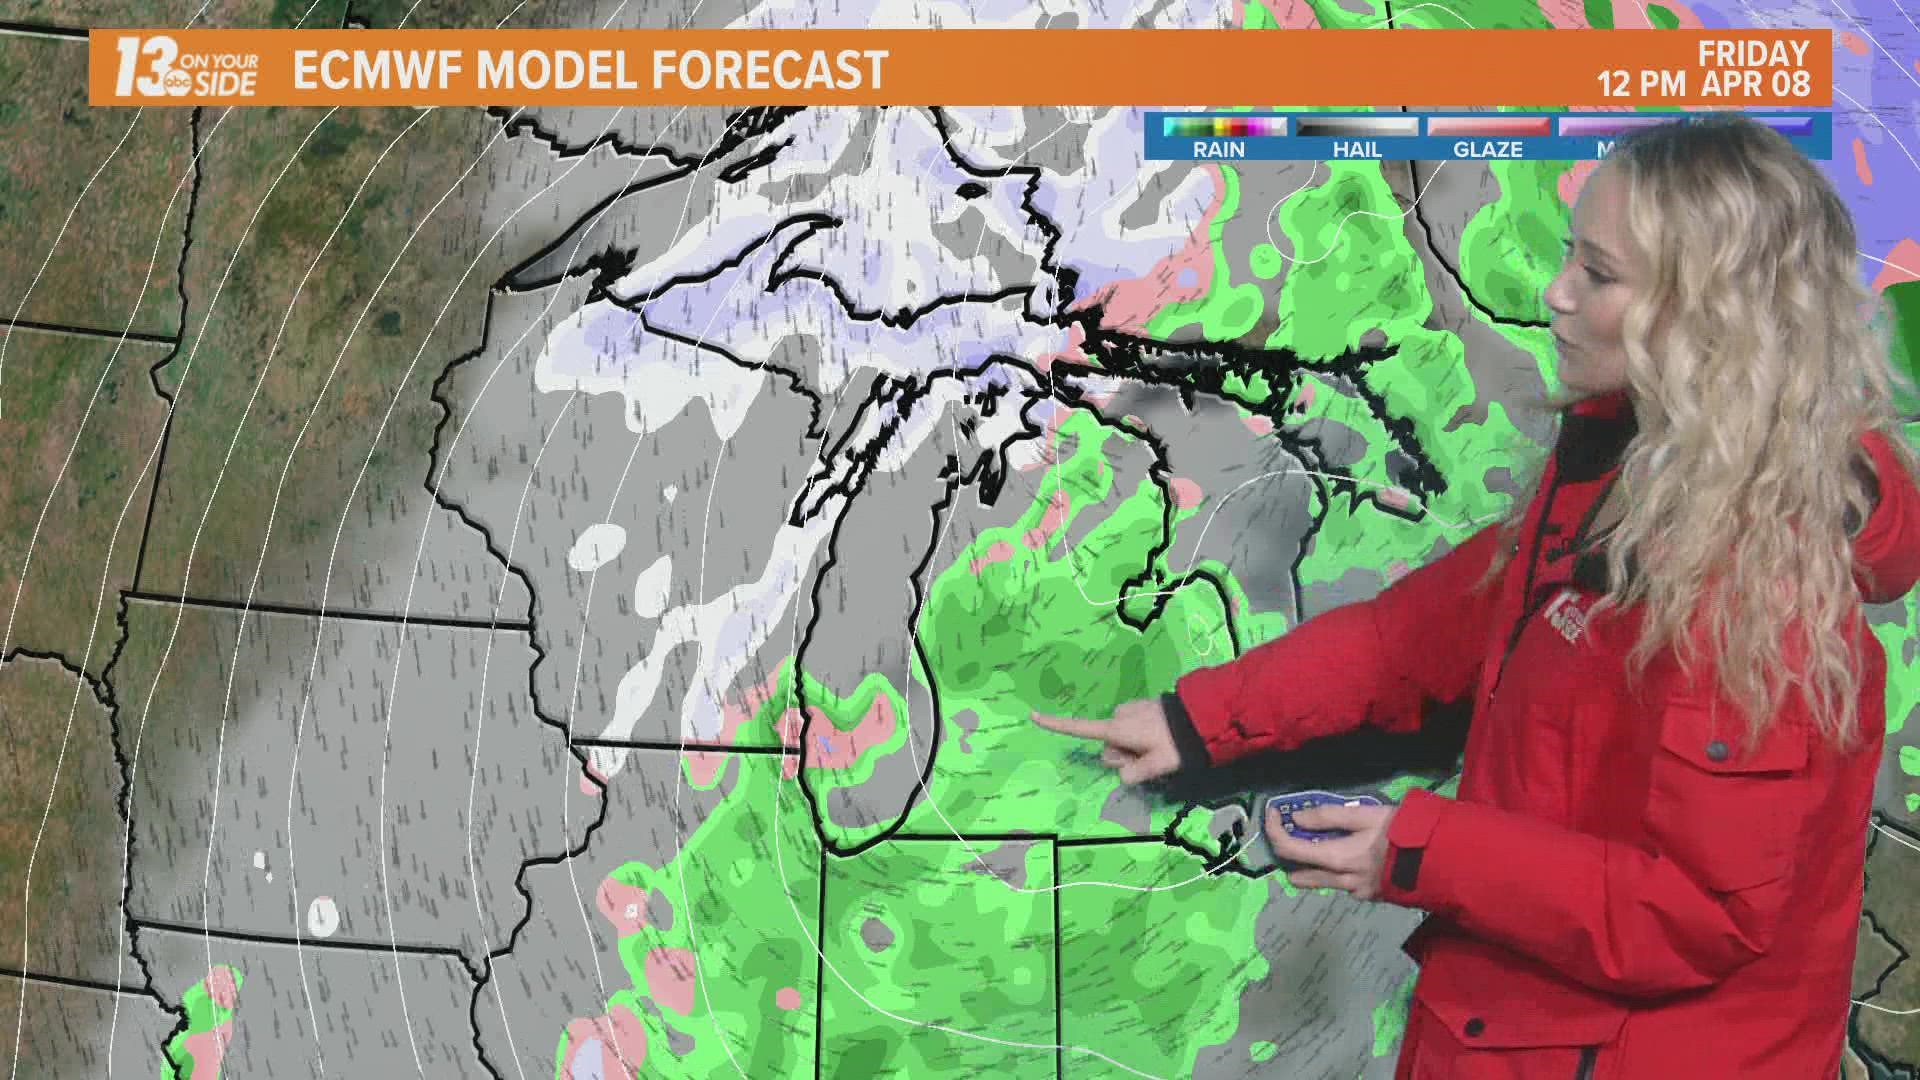 Cloudy and damp Saturday, Forecast